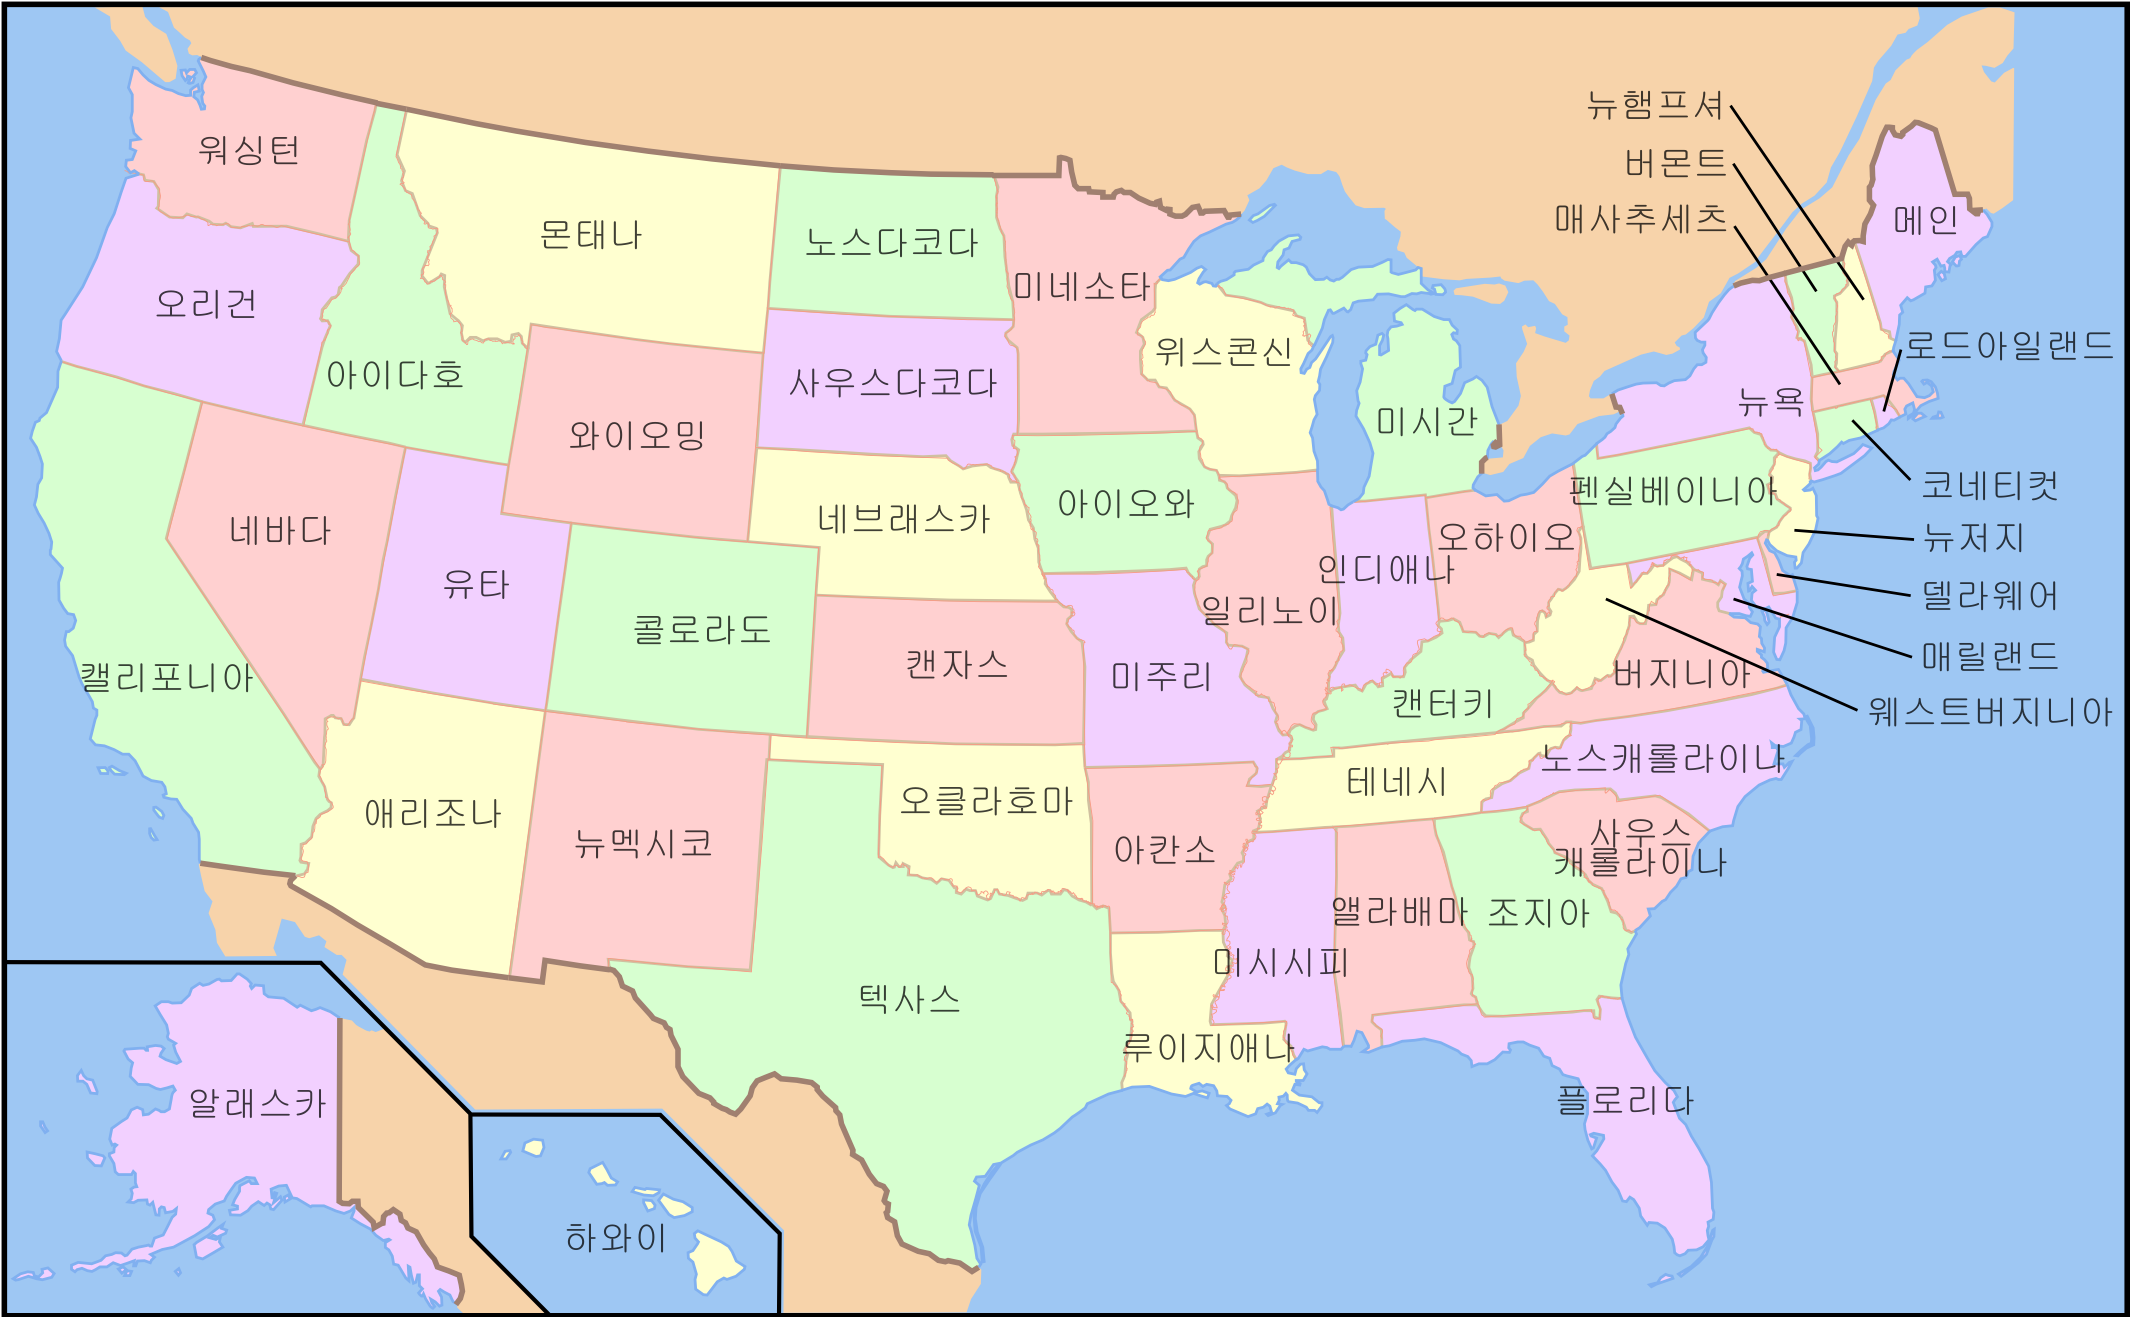 Is Map With State Names